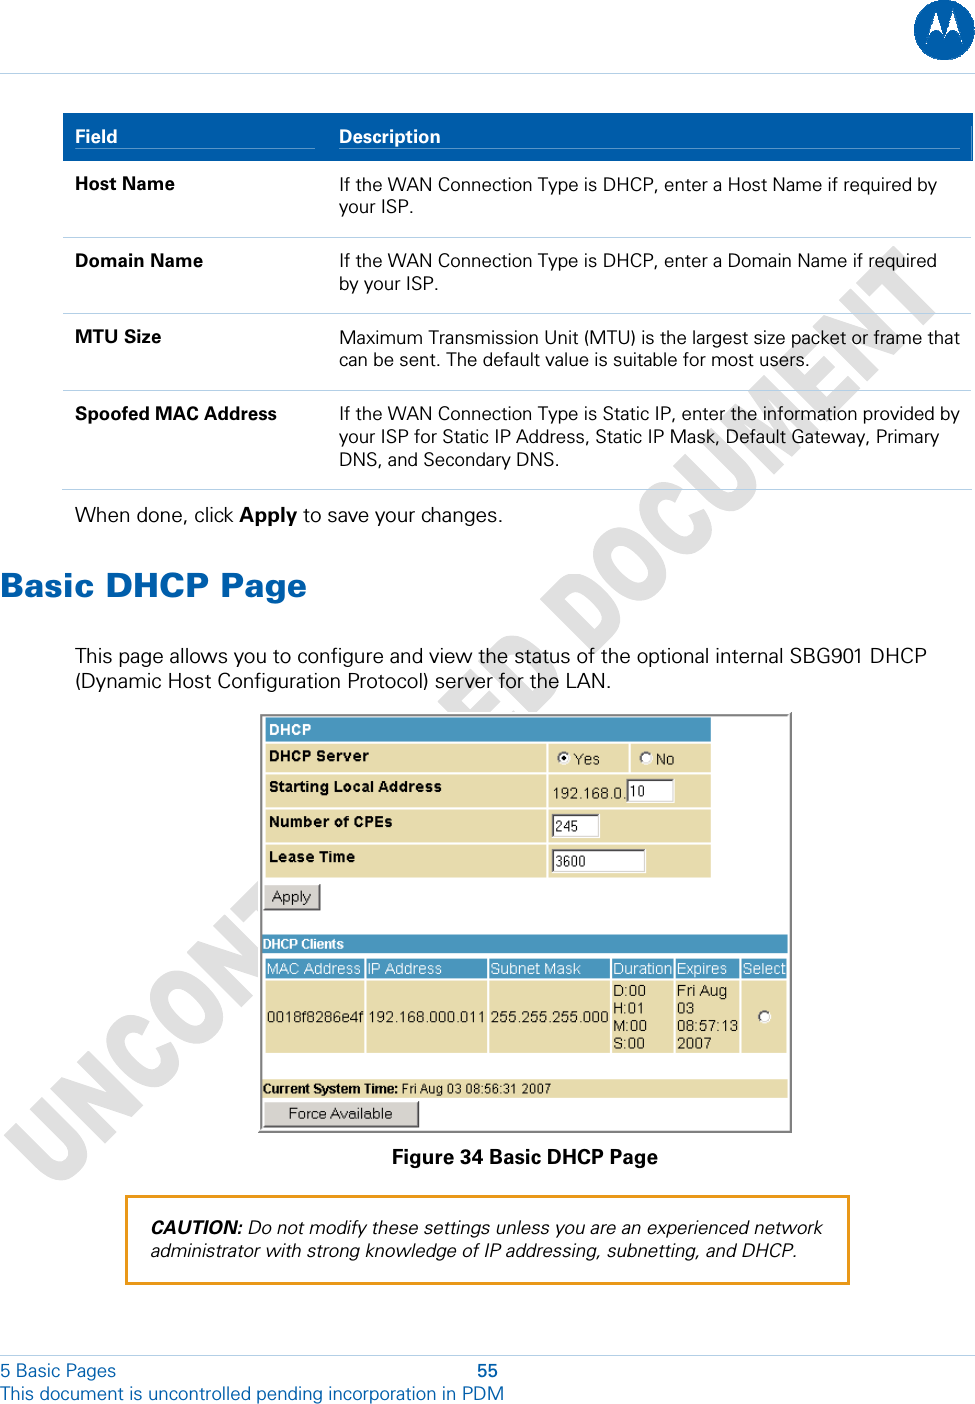  5 Basic Pages  55 This document is uncontrolled pending incorporation in PDM  Field   Description Host Name  If the WAN Connection Type is DHCP, enter a Host Name if required by your ISP. Domain Name  If the WAN Connection Type is DHCP, enter a Domain Name if required by your ISP. MTU Size  Maximum Transmission Unit (MTU) is the largest size packet or frame that can be sent. The default value is suitable for most users. Spoofed MAC Address  If the WAN Connection Type is Static IP, enter the information provided by your ISP for Static IP Address, Static IP Mask, Default Gateway, Primary DNS, and Secondary DNS. When done, click Apply to save your changes. Basic DHCP Page This page allows you to configure and view the status of the optional internal SBG901 DHCP (Dynamic Host Configuration Protocol) server for the LAN.  Figure 34 Basic DHCP Page CAUTION: Do not modify these settings unless you are an experienced network administrator with strong knowledge of IP addressing, subnetting, and DHCP. 